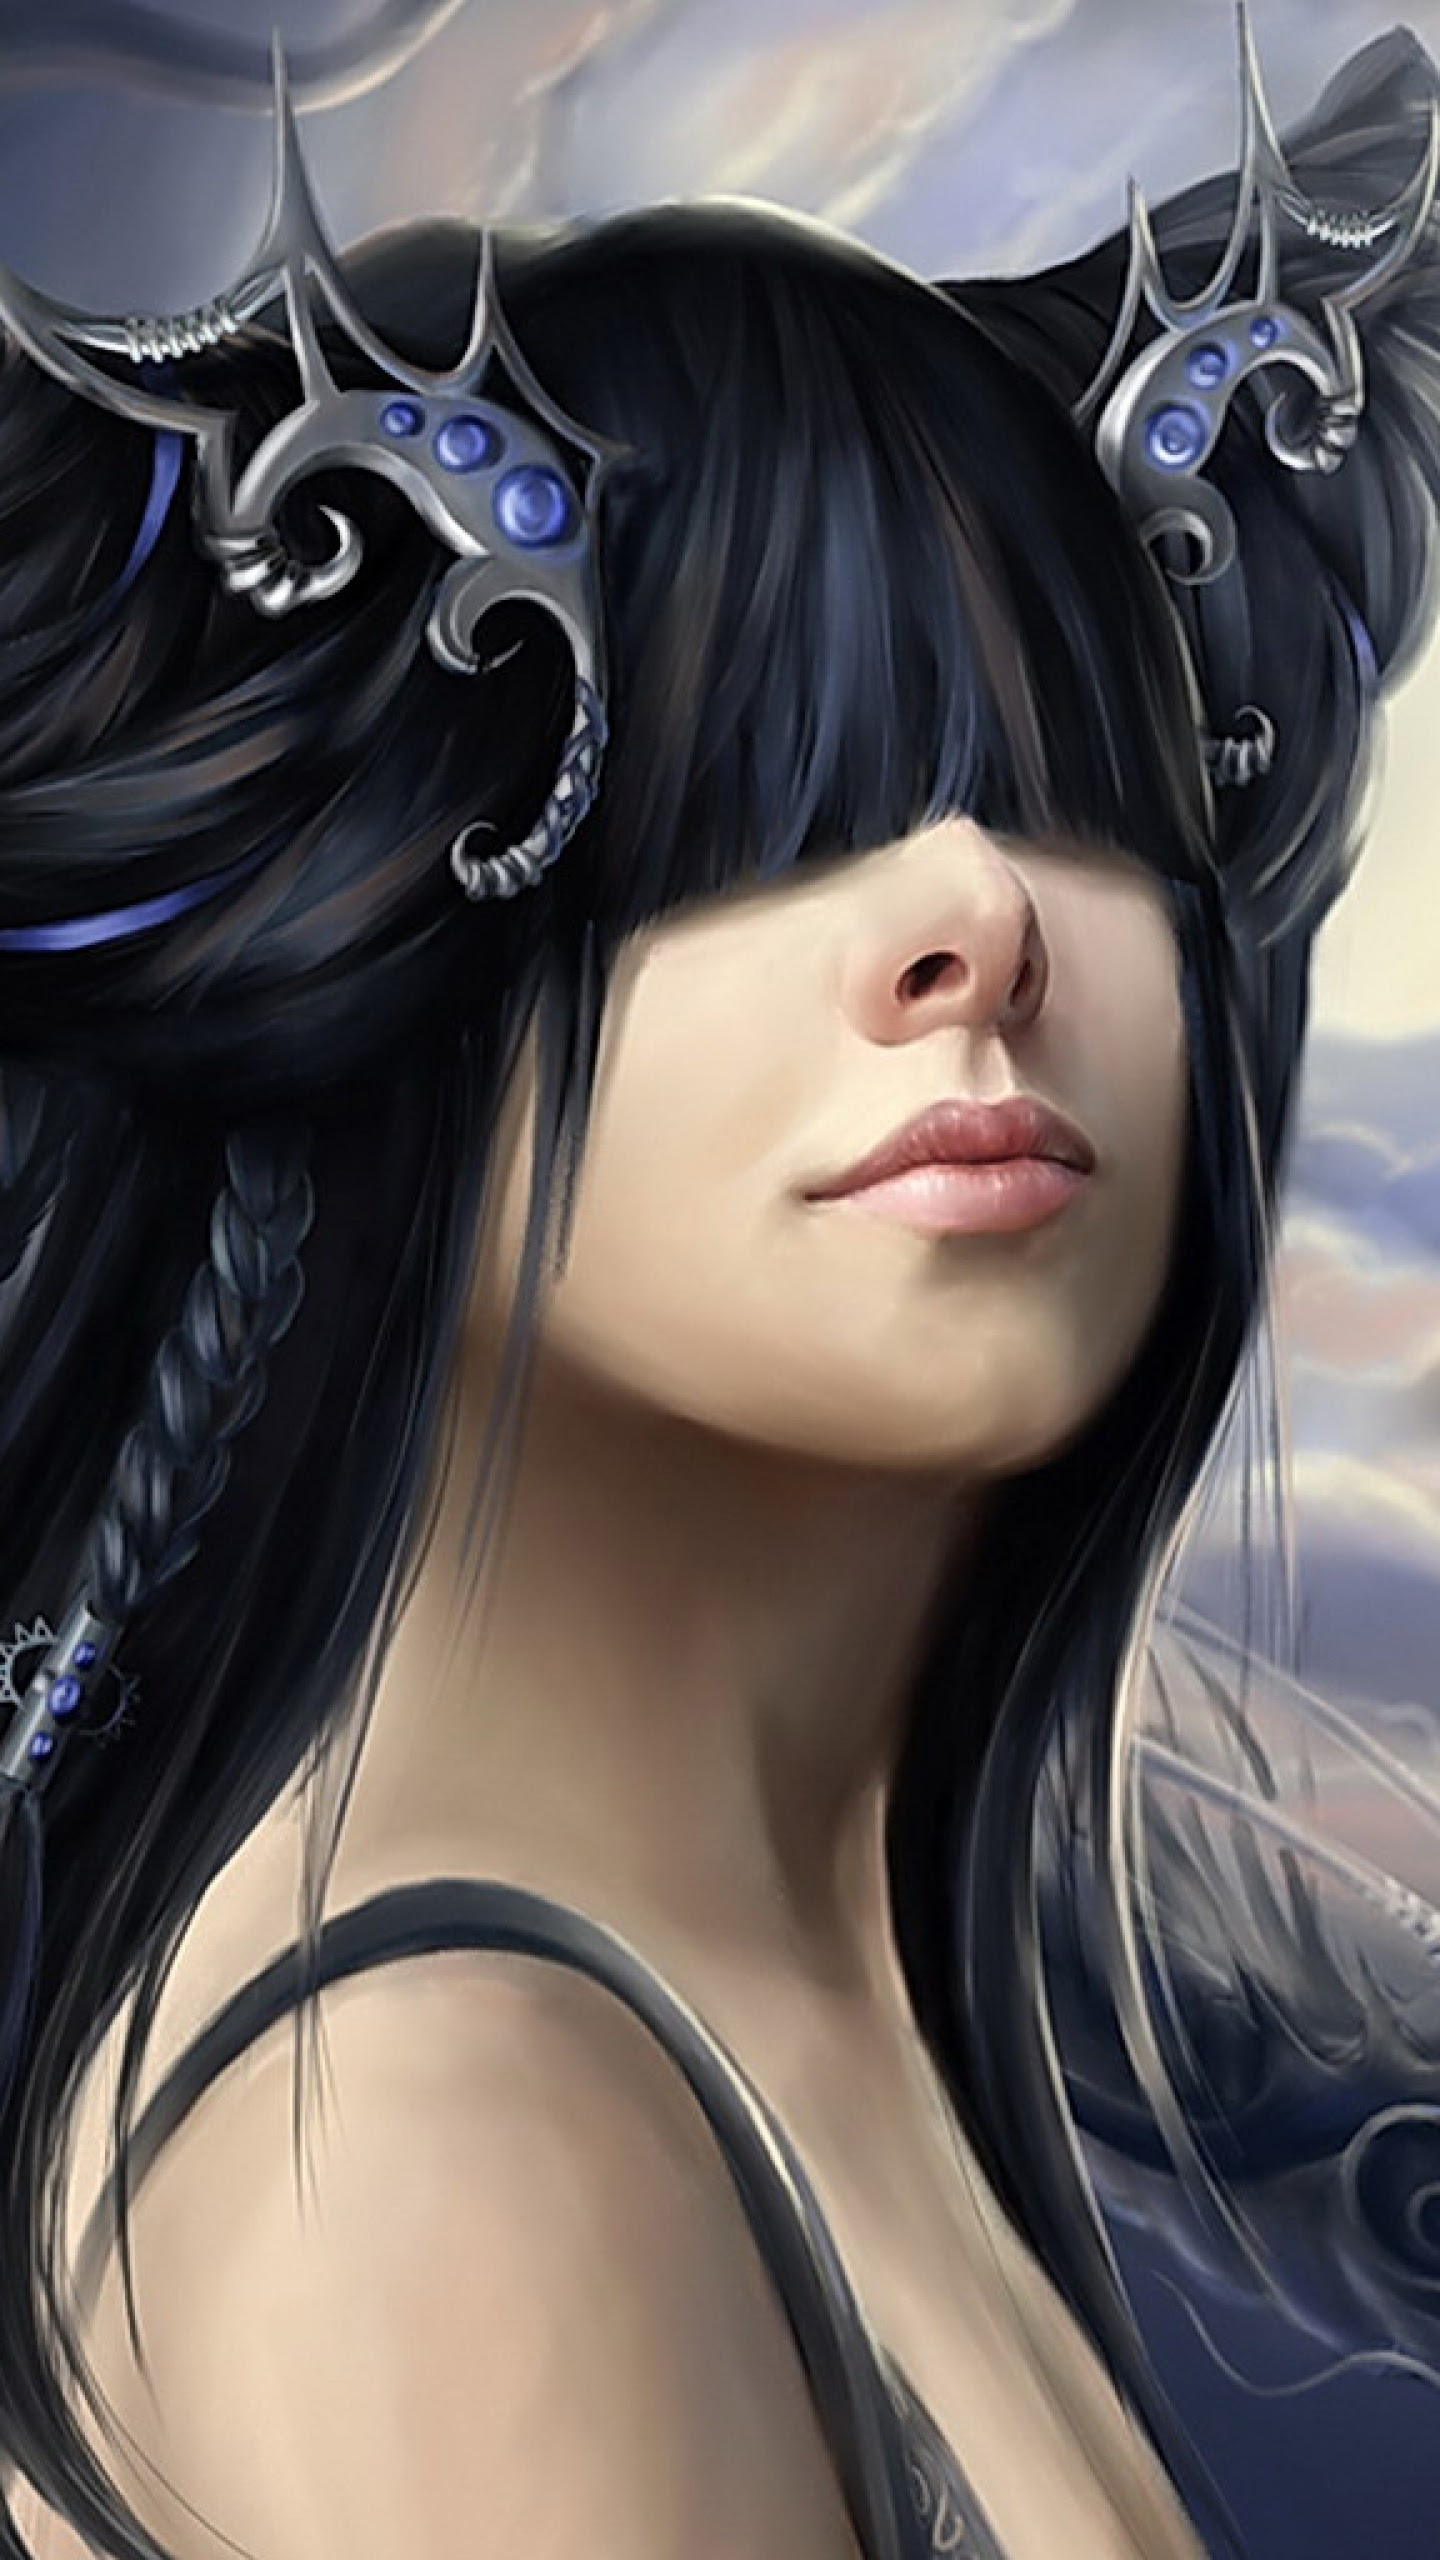 girl wallpapers for android,hair,face,cg artwork,beauty,hairstyle